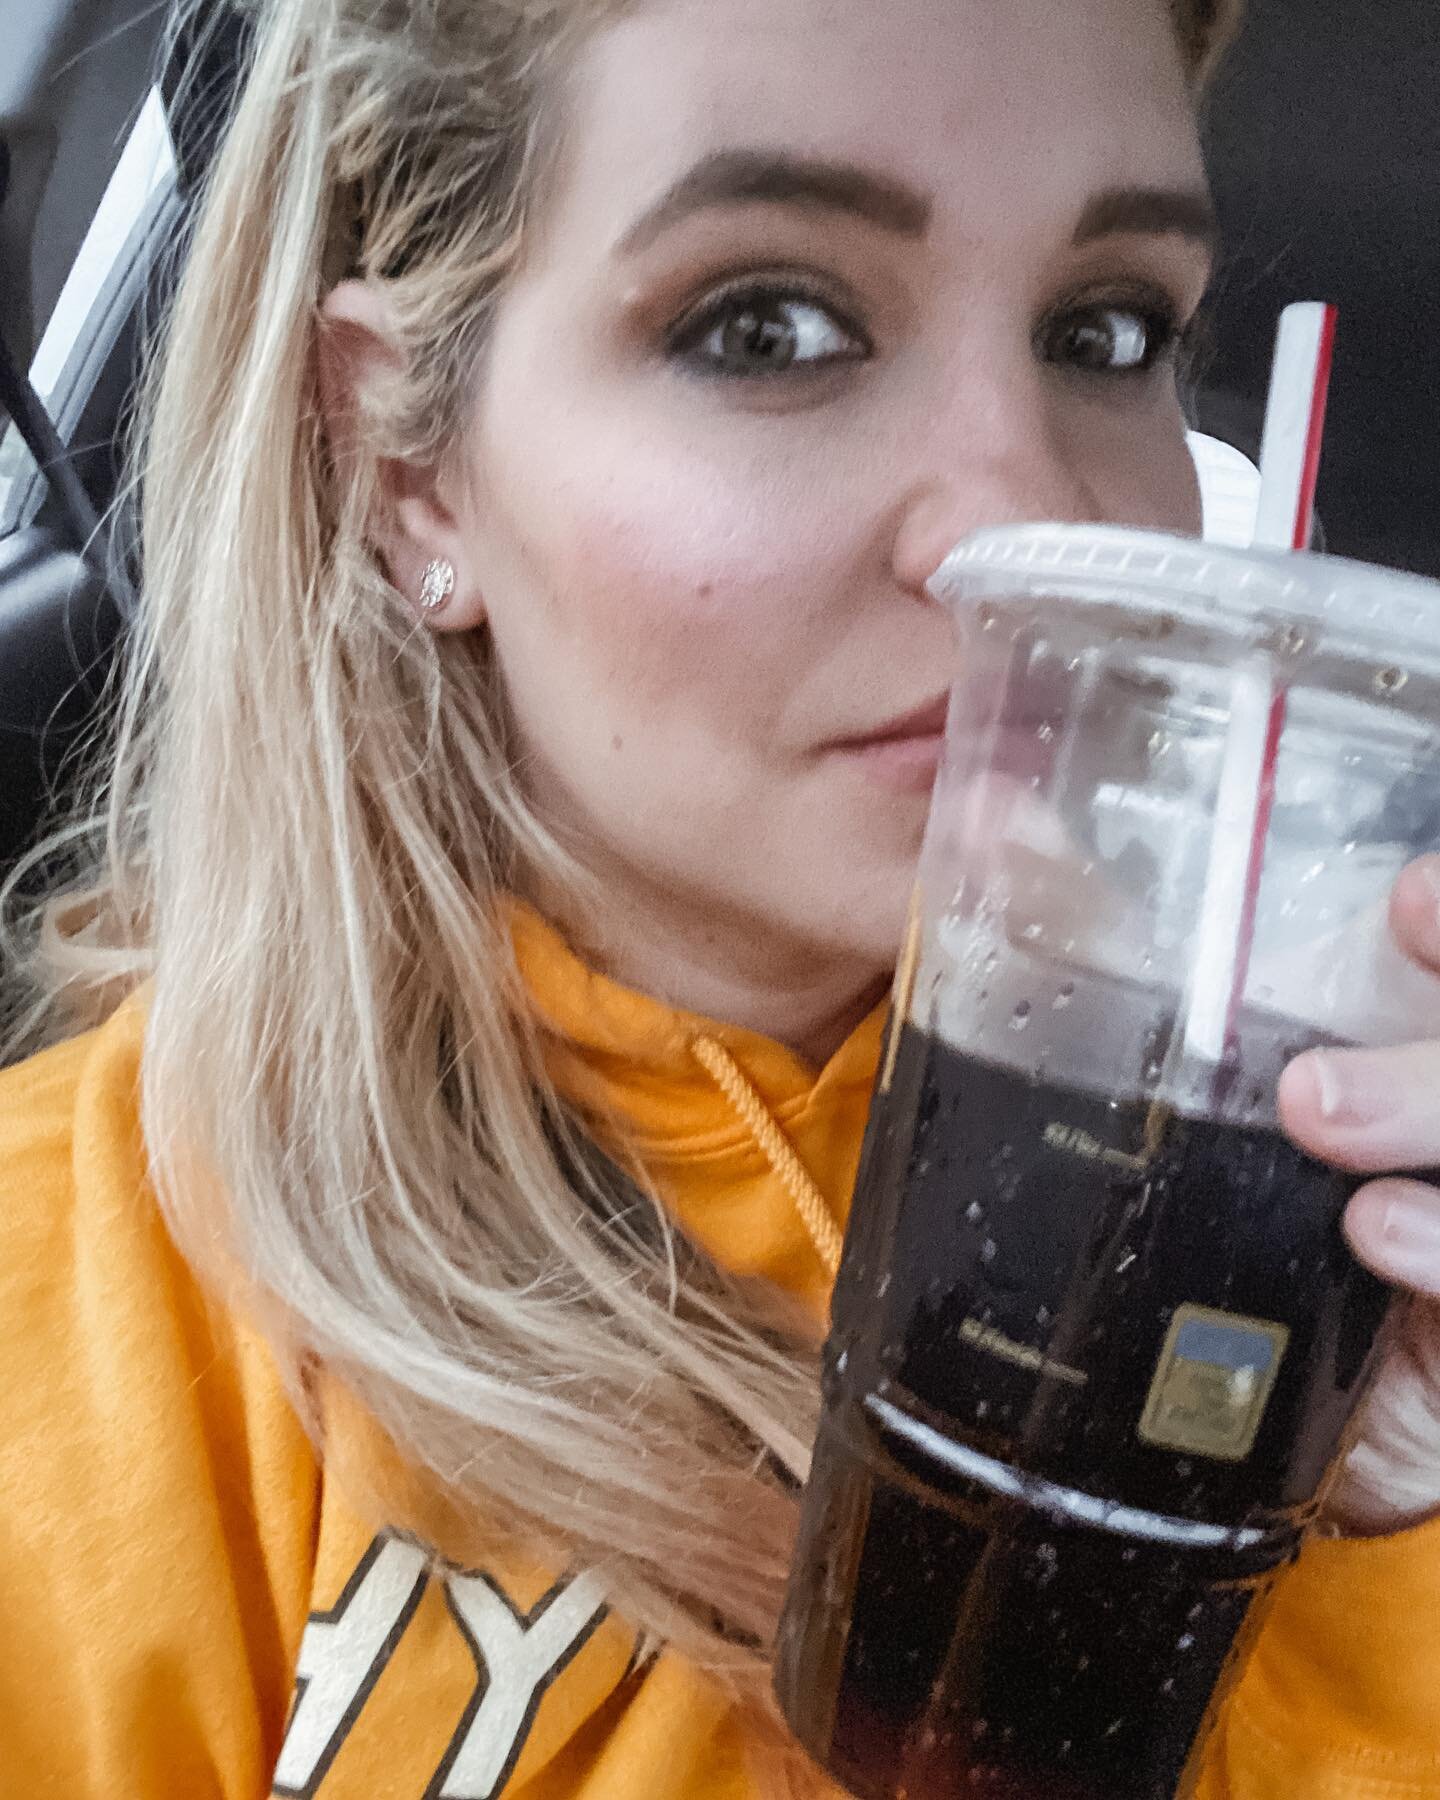 genuinely cannot remember if this is iced coffee or Diet Coke and honestly that&rsquo;s the only thing you gotta know about my ~brand~